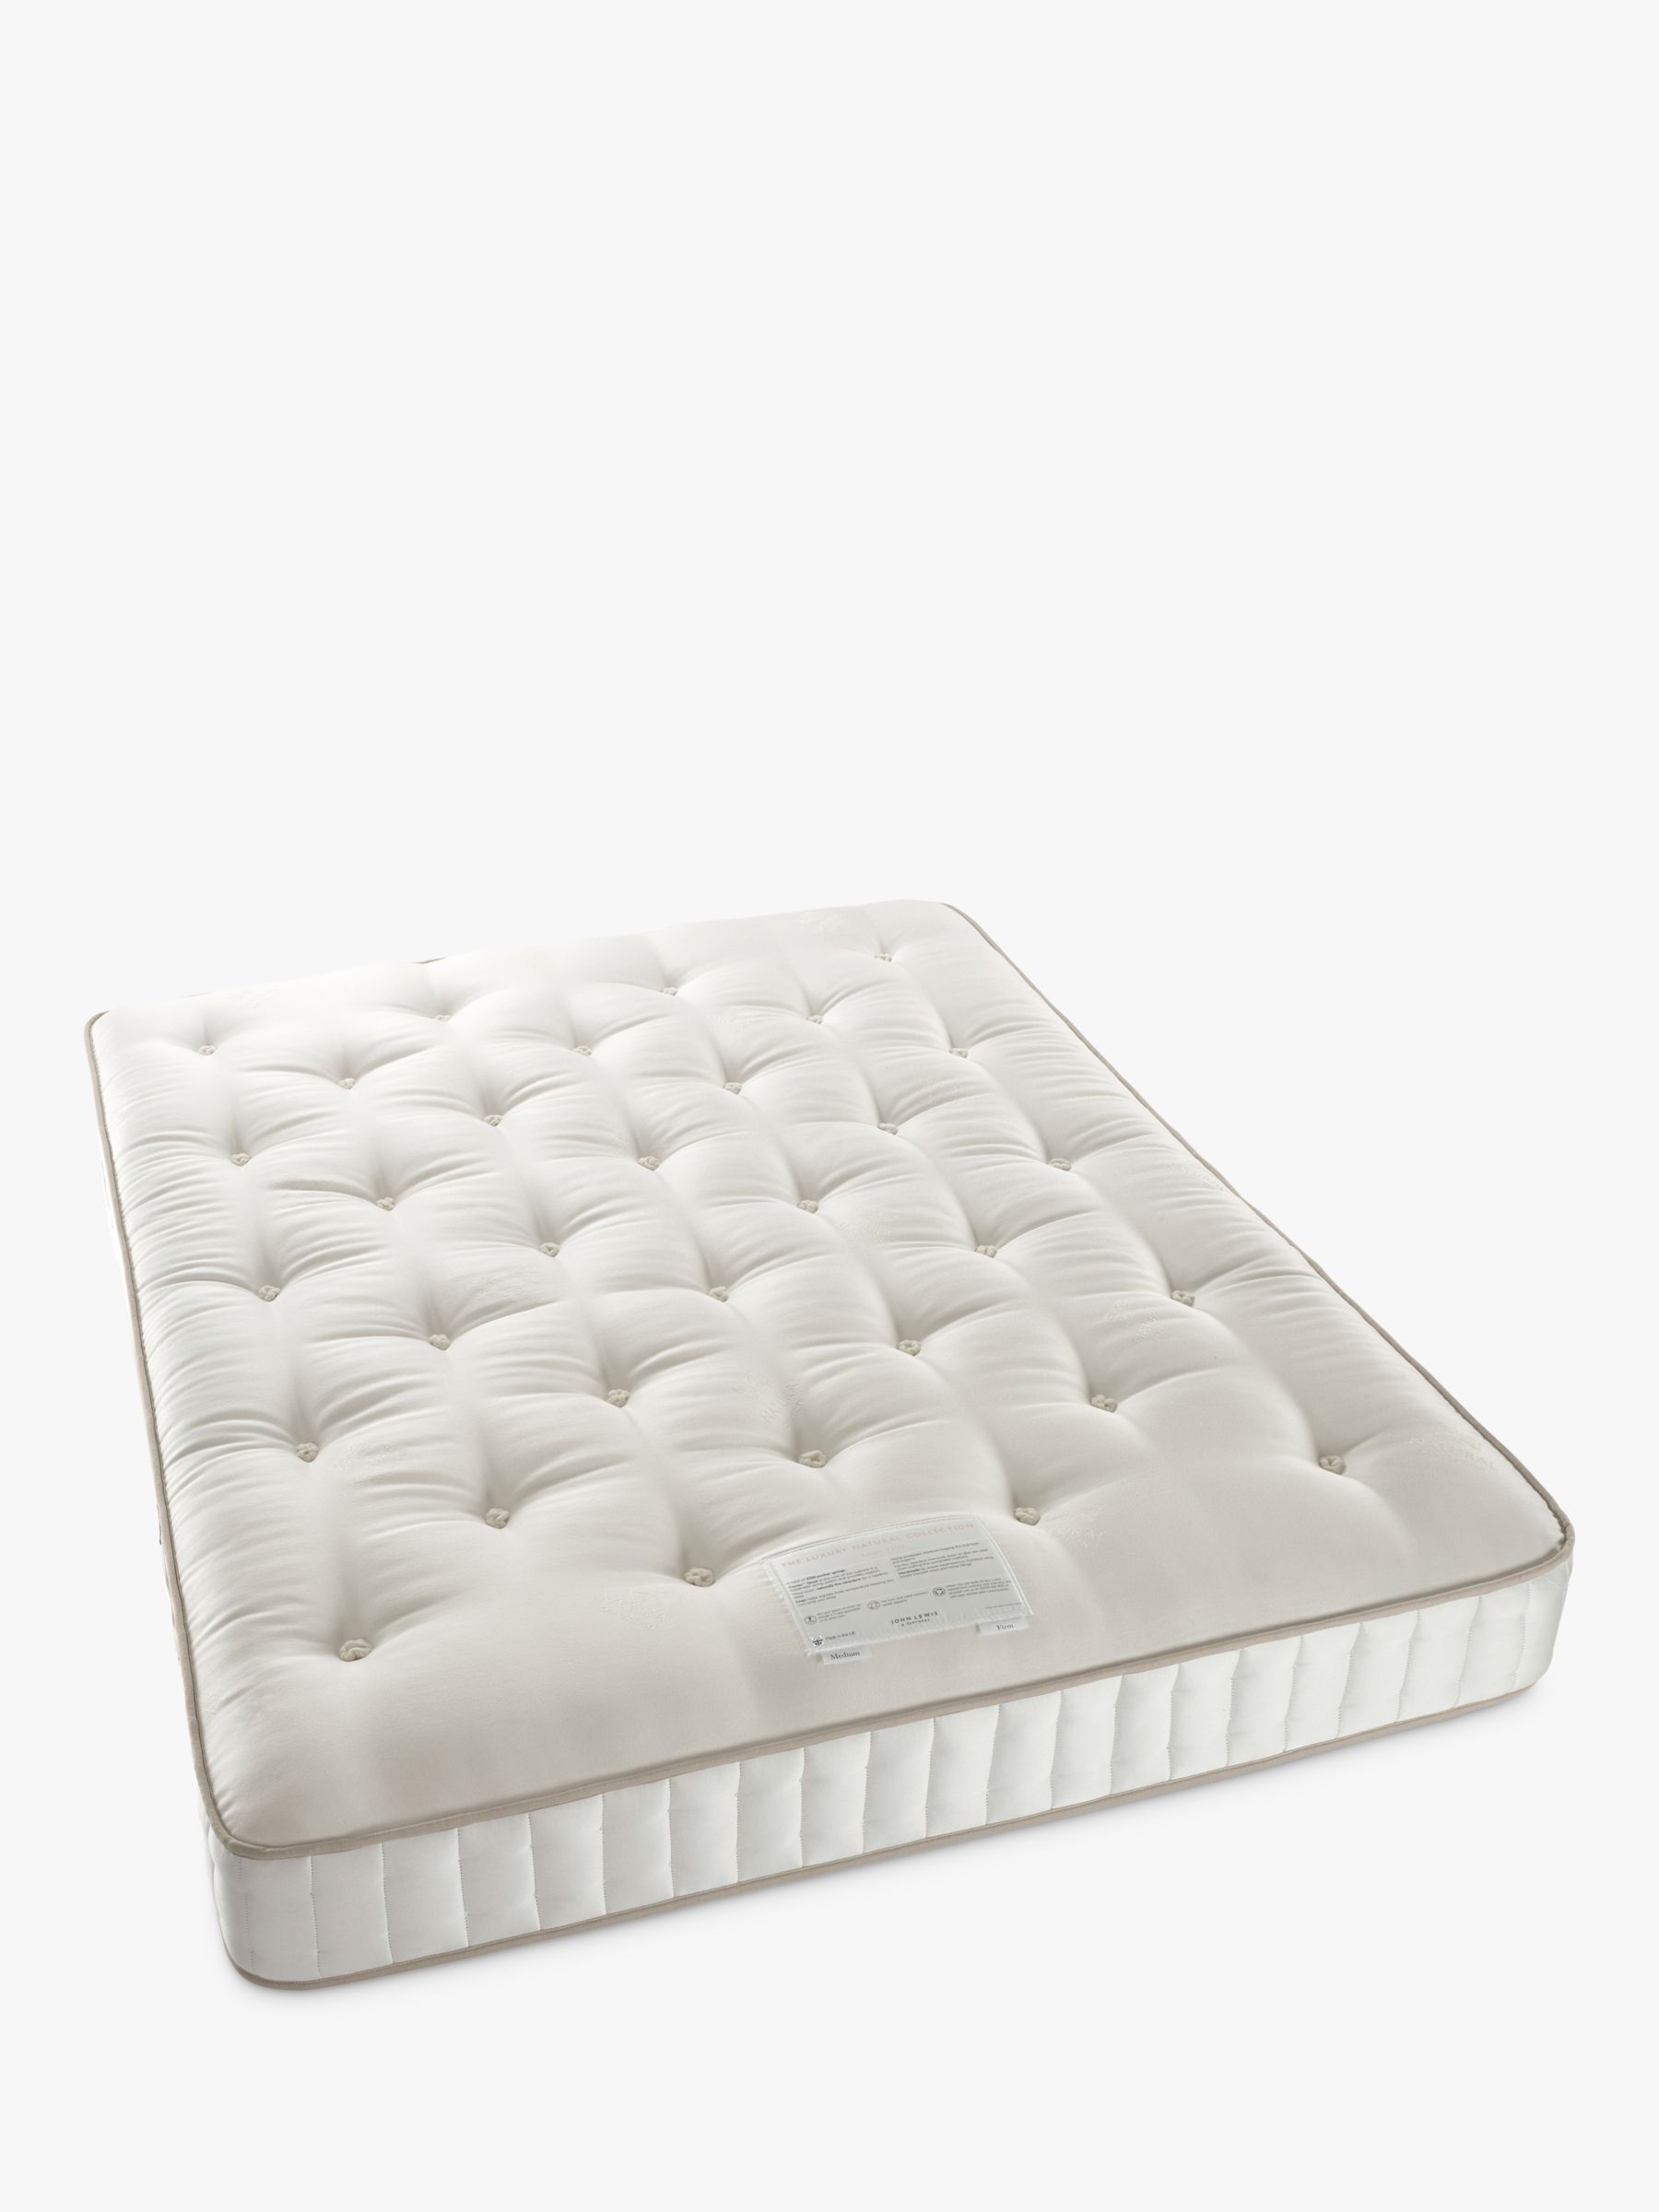 Photo of John lewis luxury natural collection linen 3250 super king size firmer tension pocket spring mattress